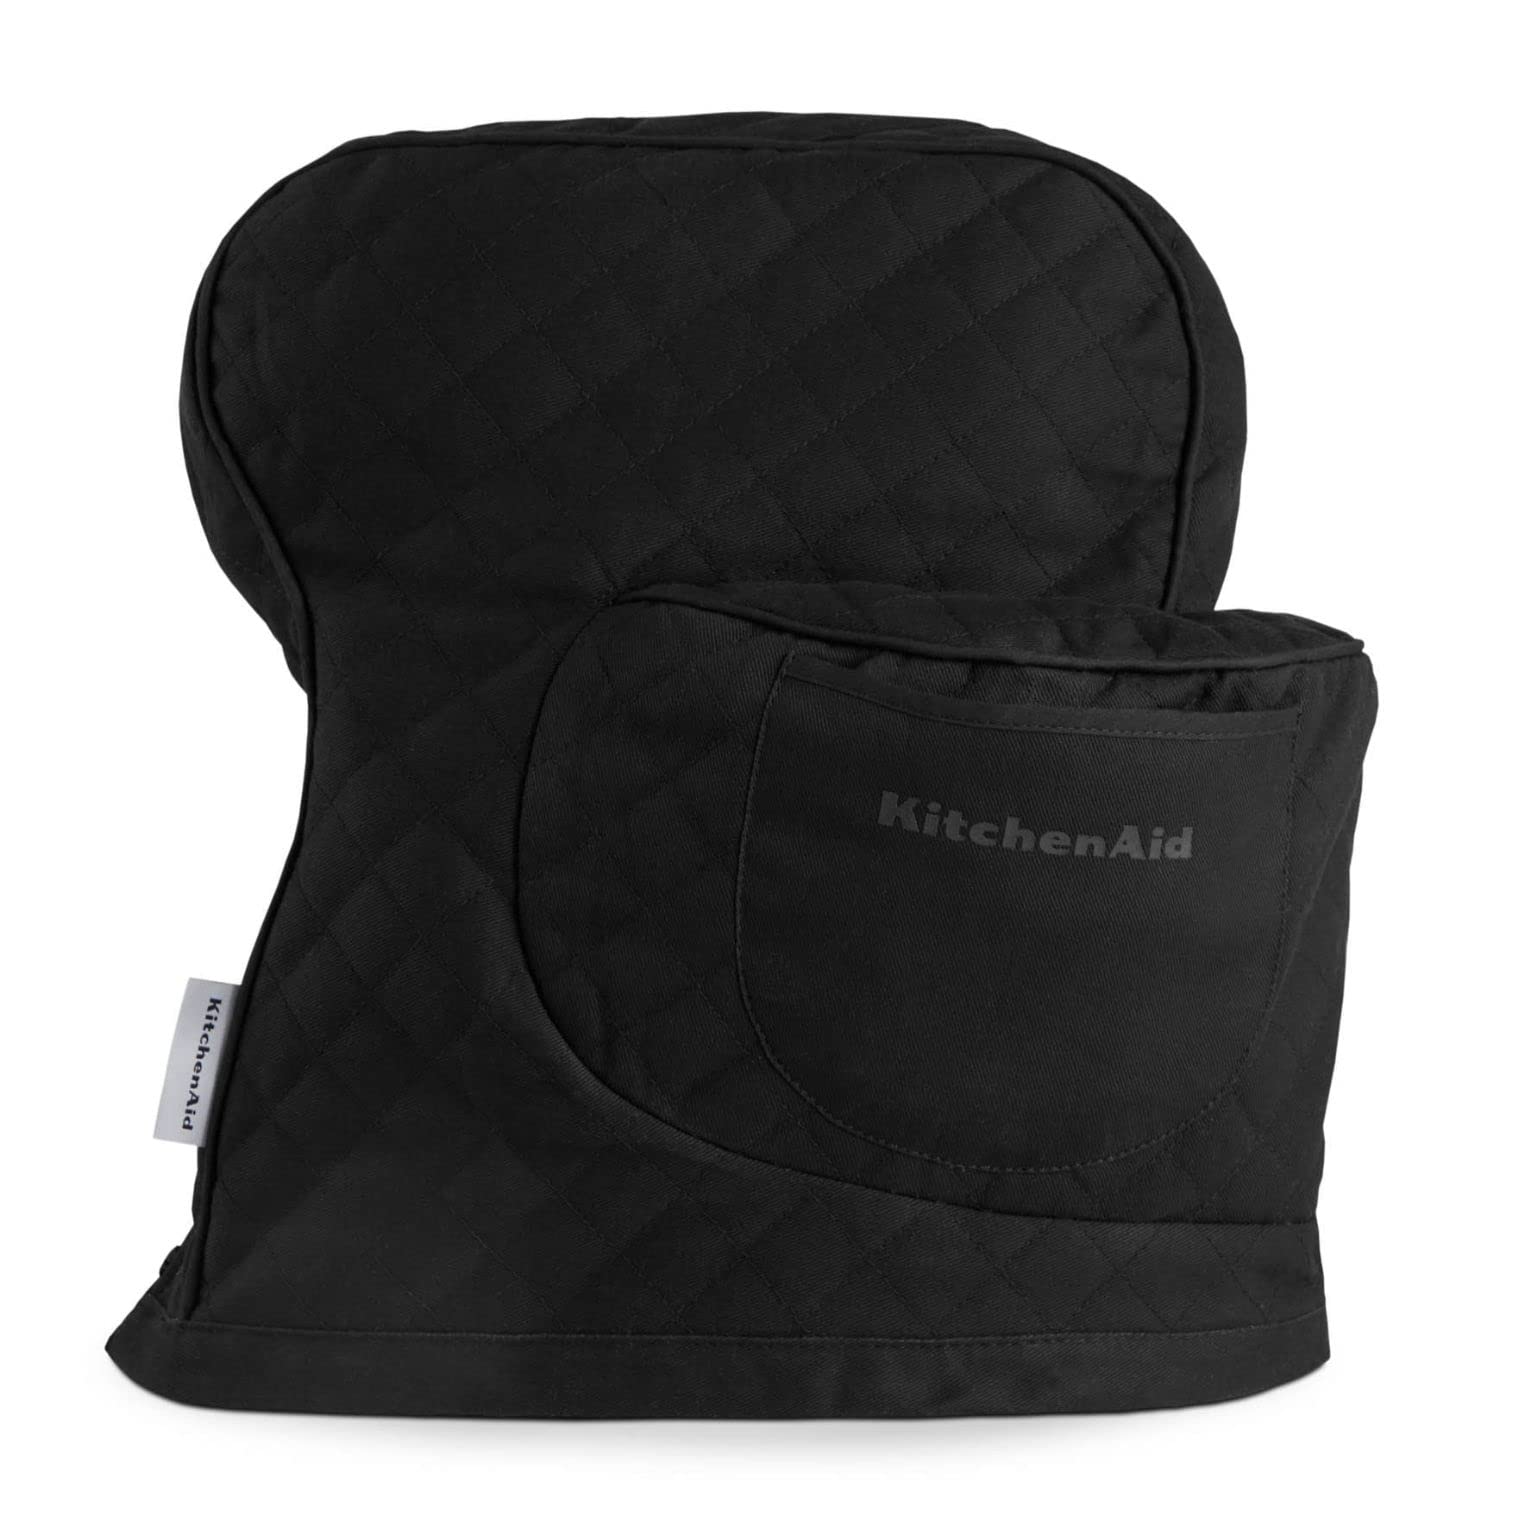 For Prime Members: KitchenAid Quilted Fitted Tilt-Head Stand Mixer Cover (Onyx Black) $18.10 + Free Shipping